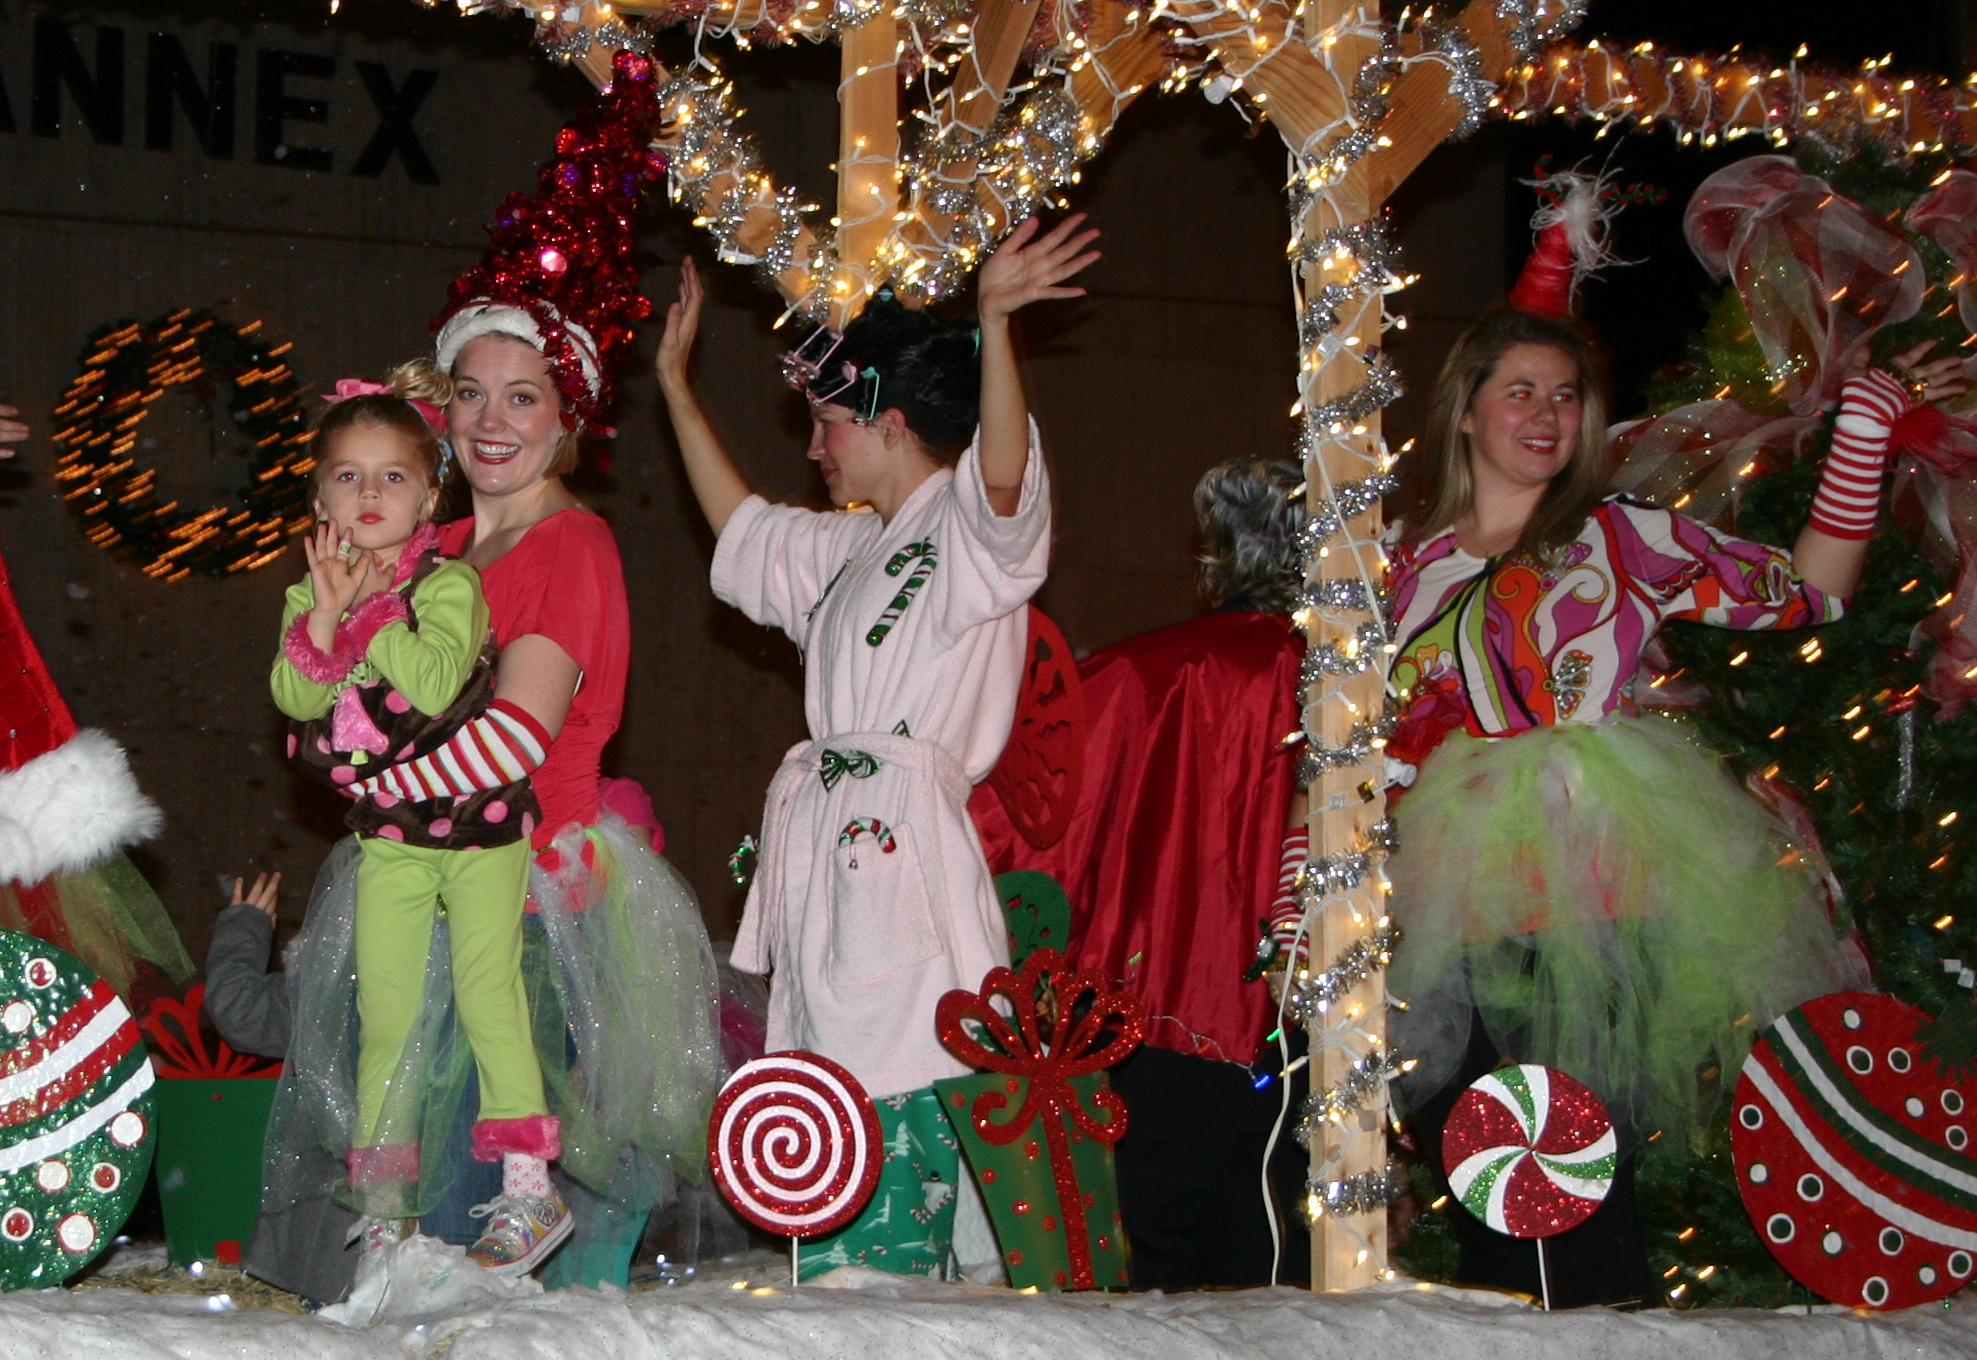 Athens Christmas Parade Scheduled for December 6